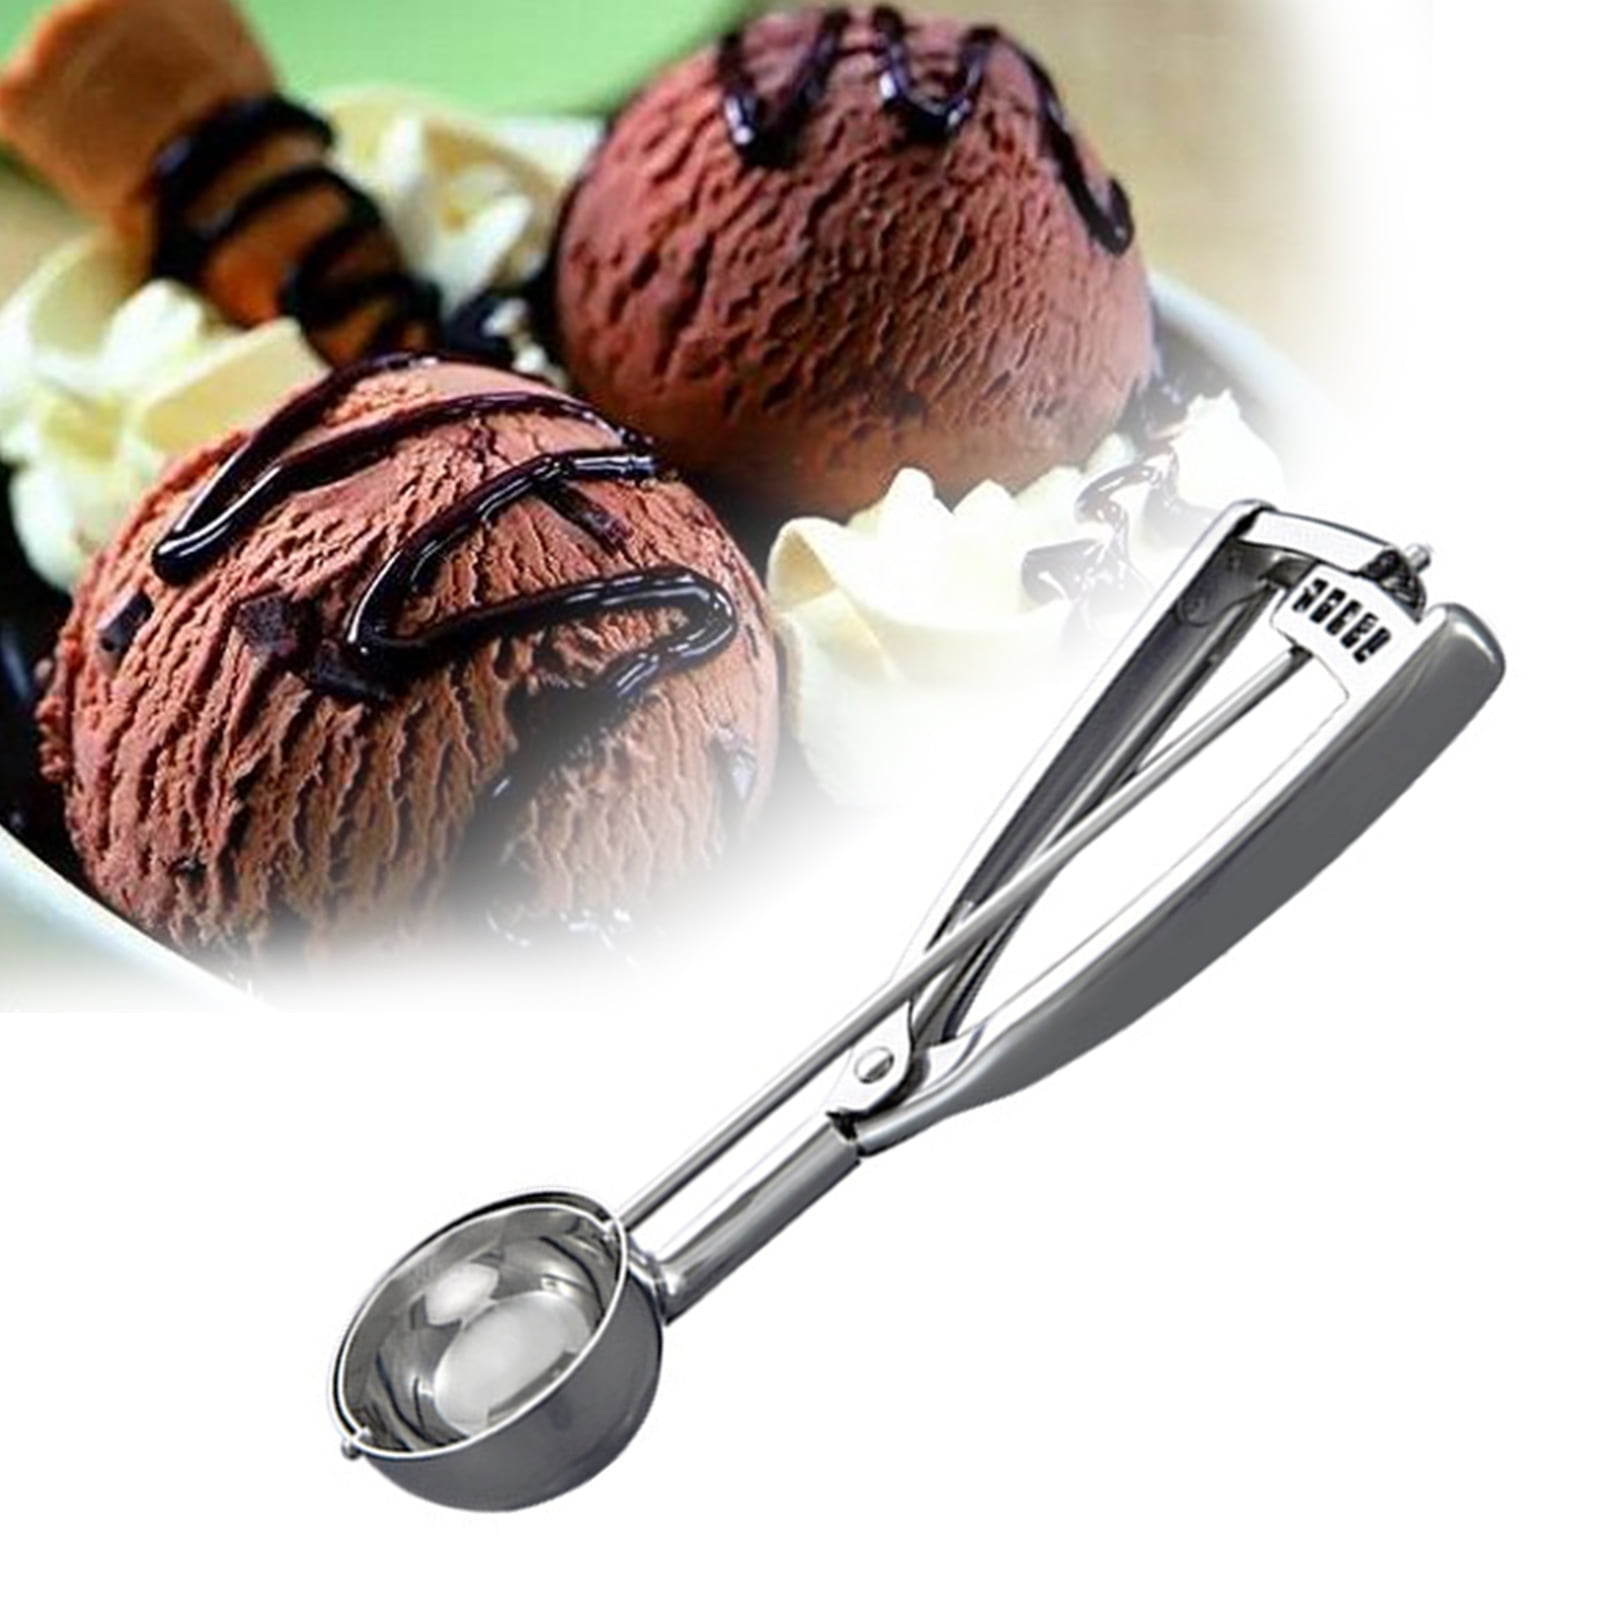 One-Touch Sliding Button Dispenses Batter。 1PC Cupcake Scoop,Scoop with Silicone Plunger Measures Equal Cupcakes or Muffins